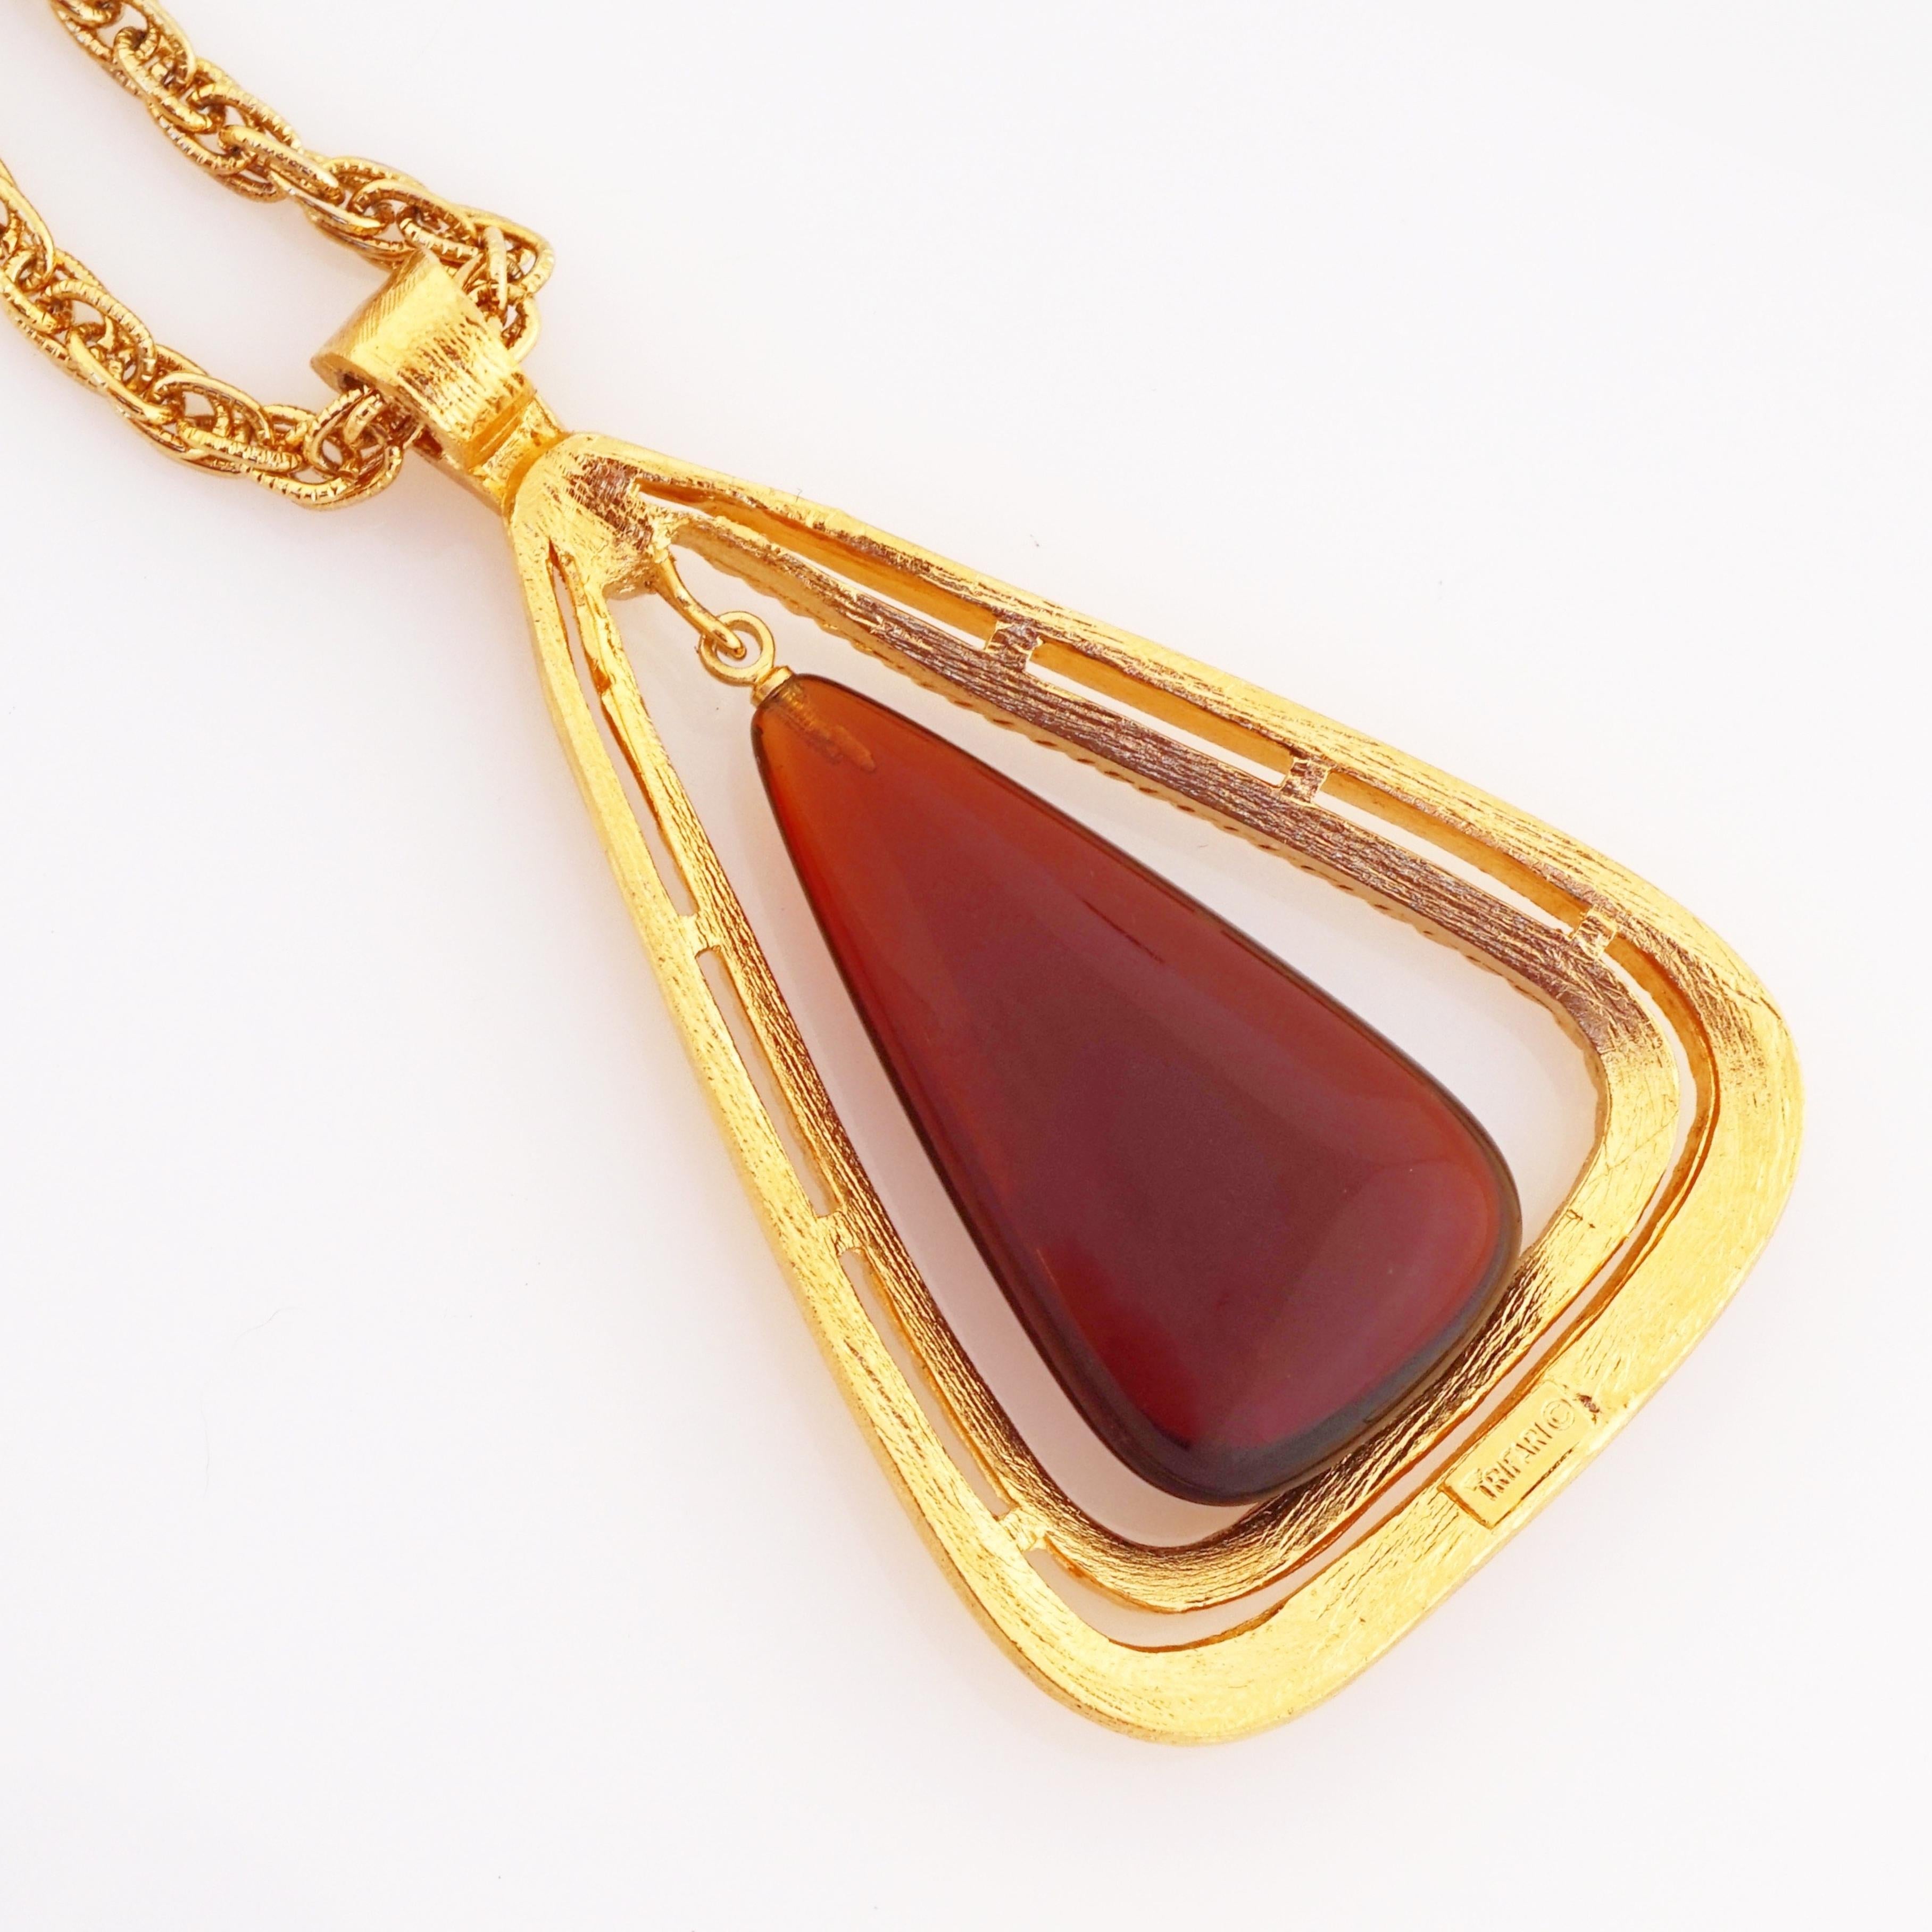 Women's Gilded Modernist Pendant Necklace With Lucite Dangle By Crown Trifari, 1960s For Sale